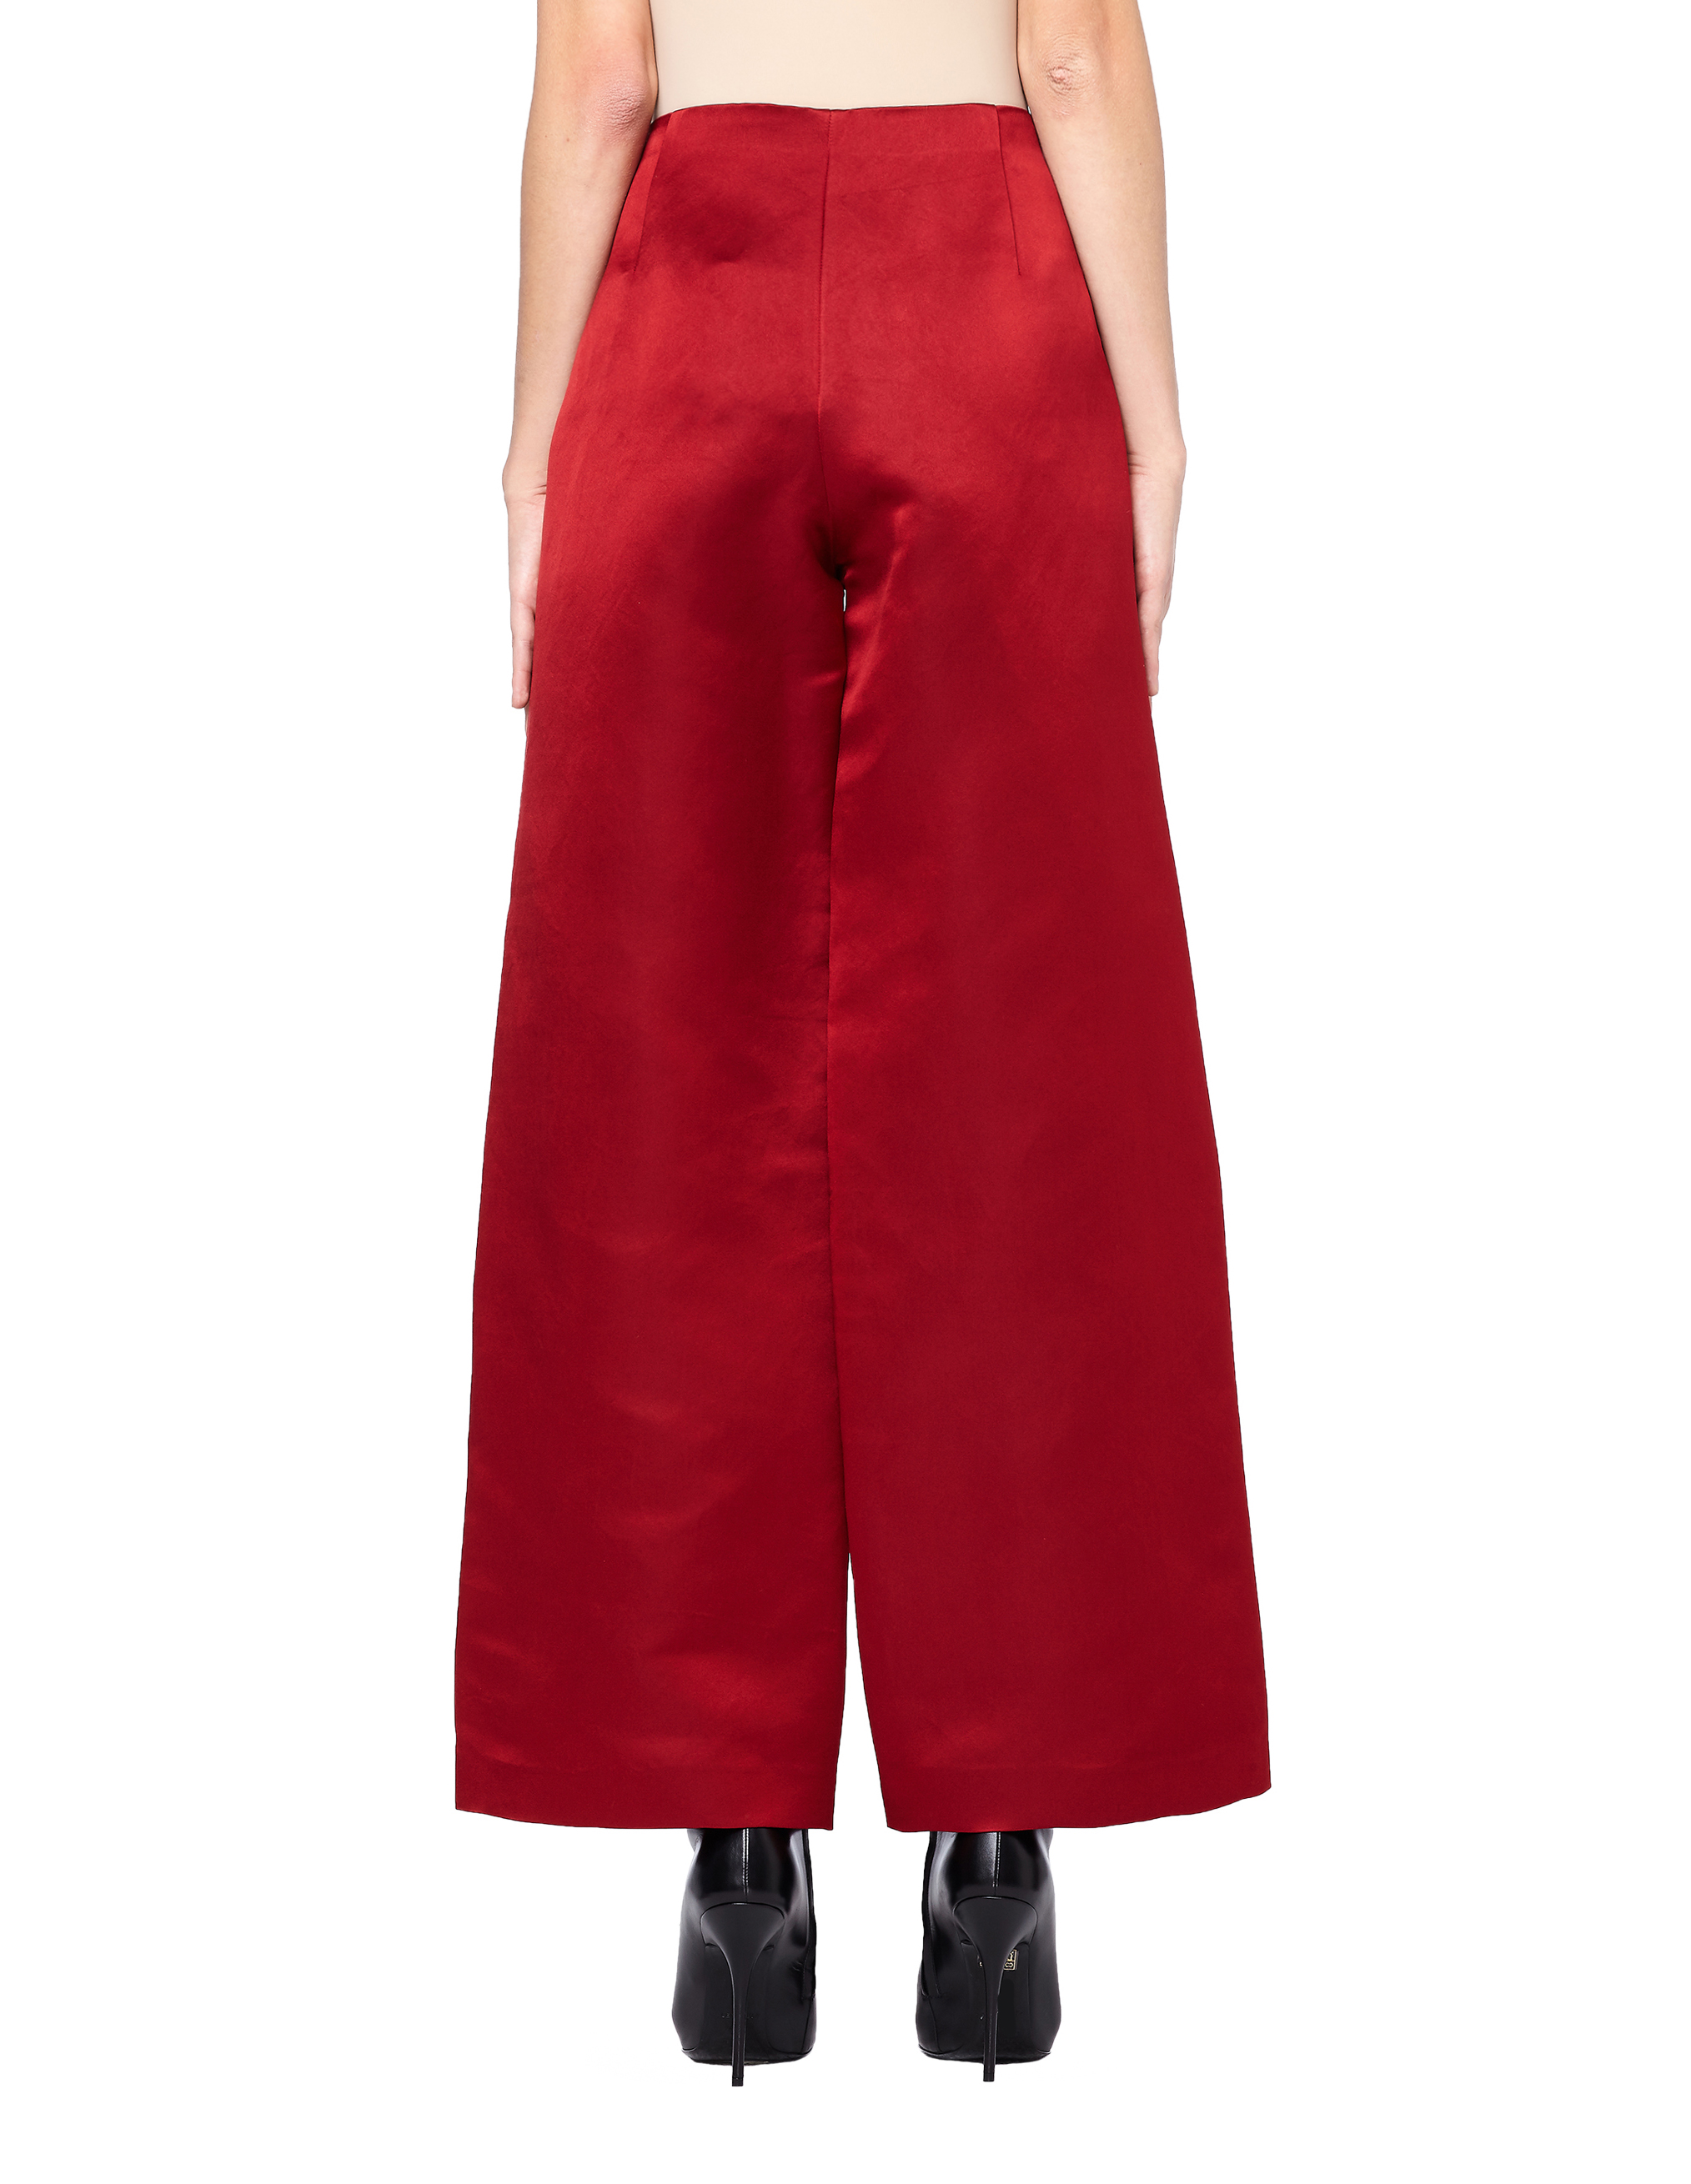 Buy The Row strom wide leg red silk pants for $833 online SV77, 3724BW932